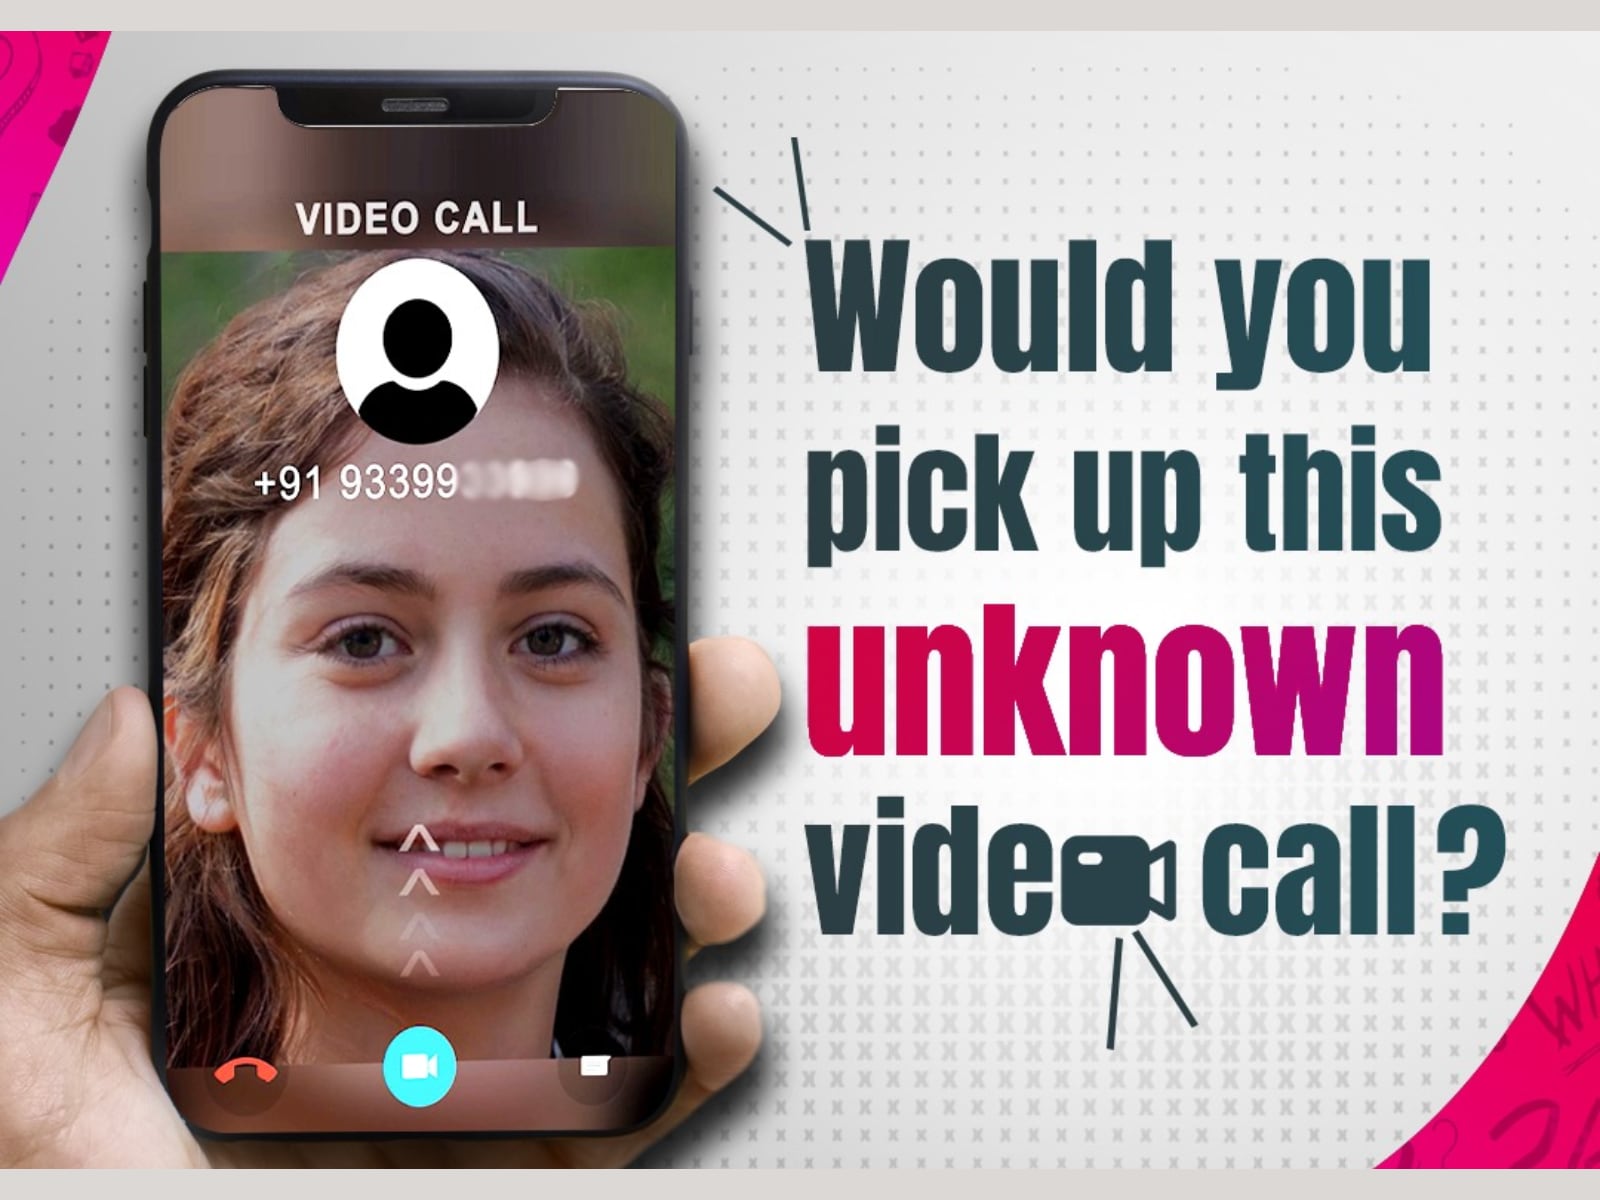 Online Scam That Takes Place On Video Call Heres How It Works And How To Stay Safe image